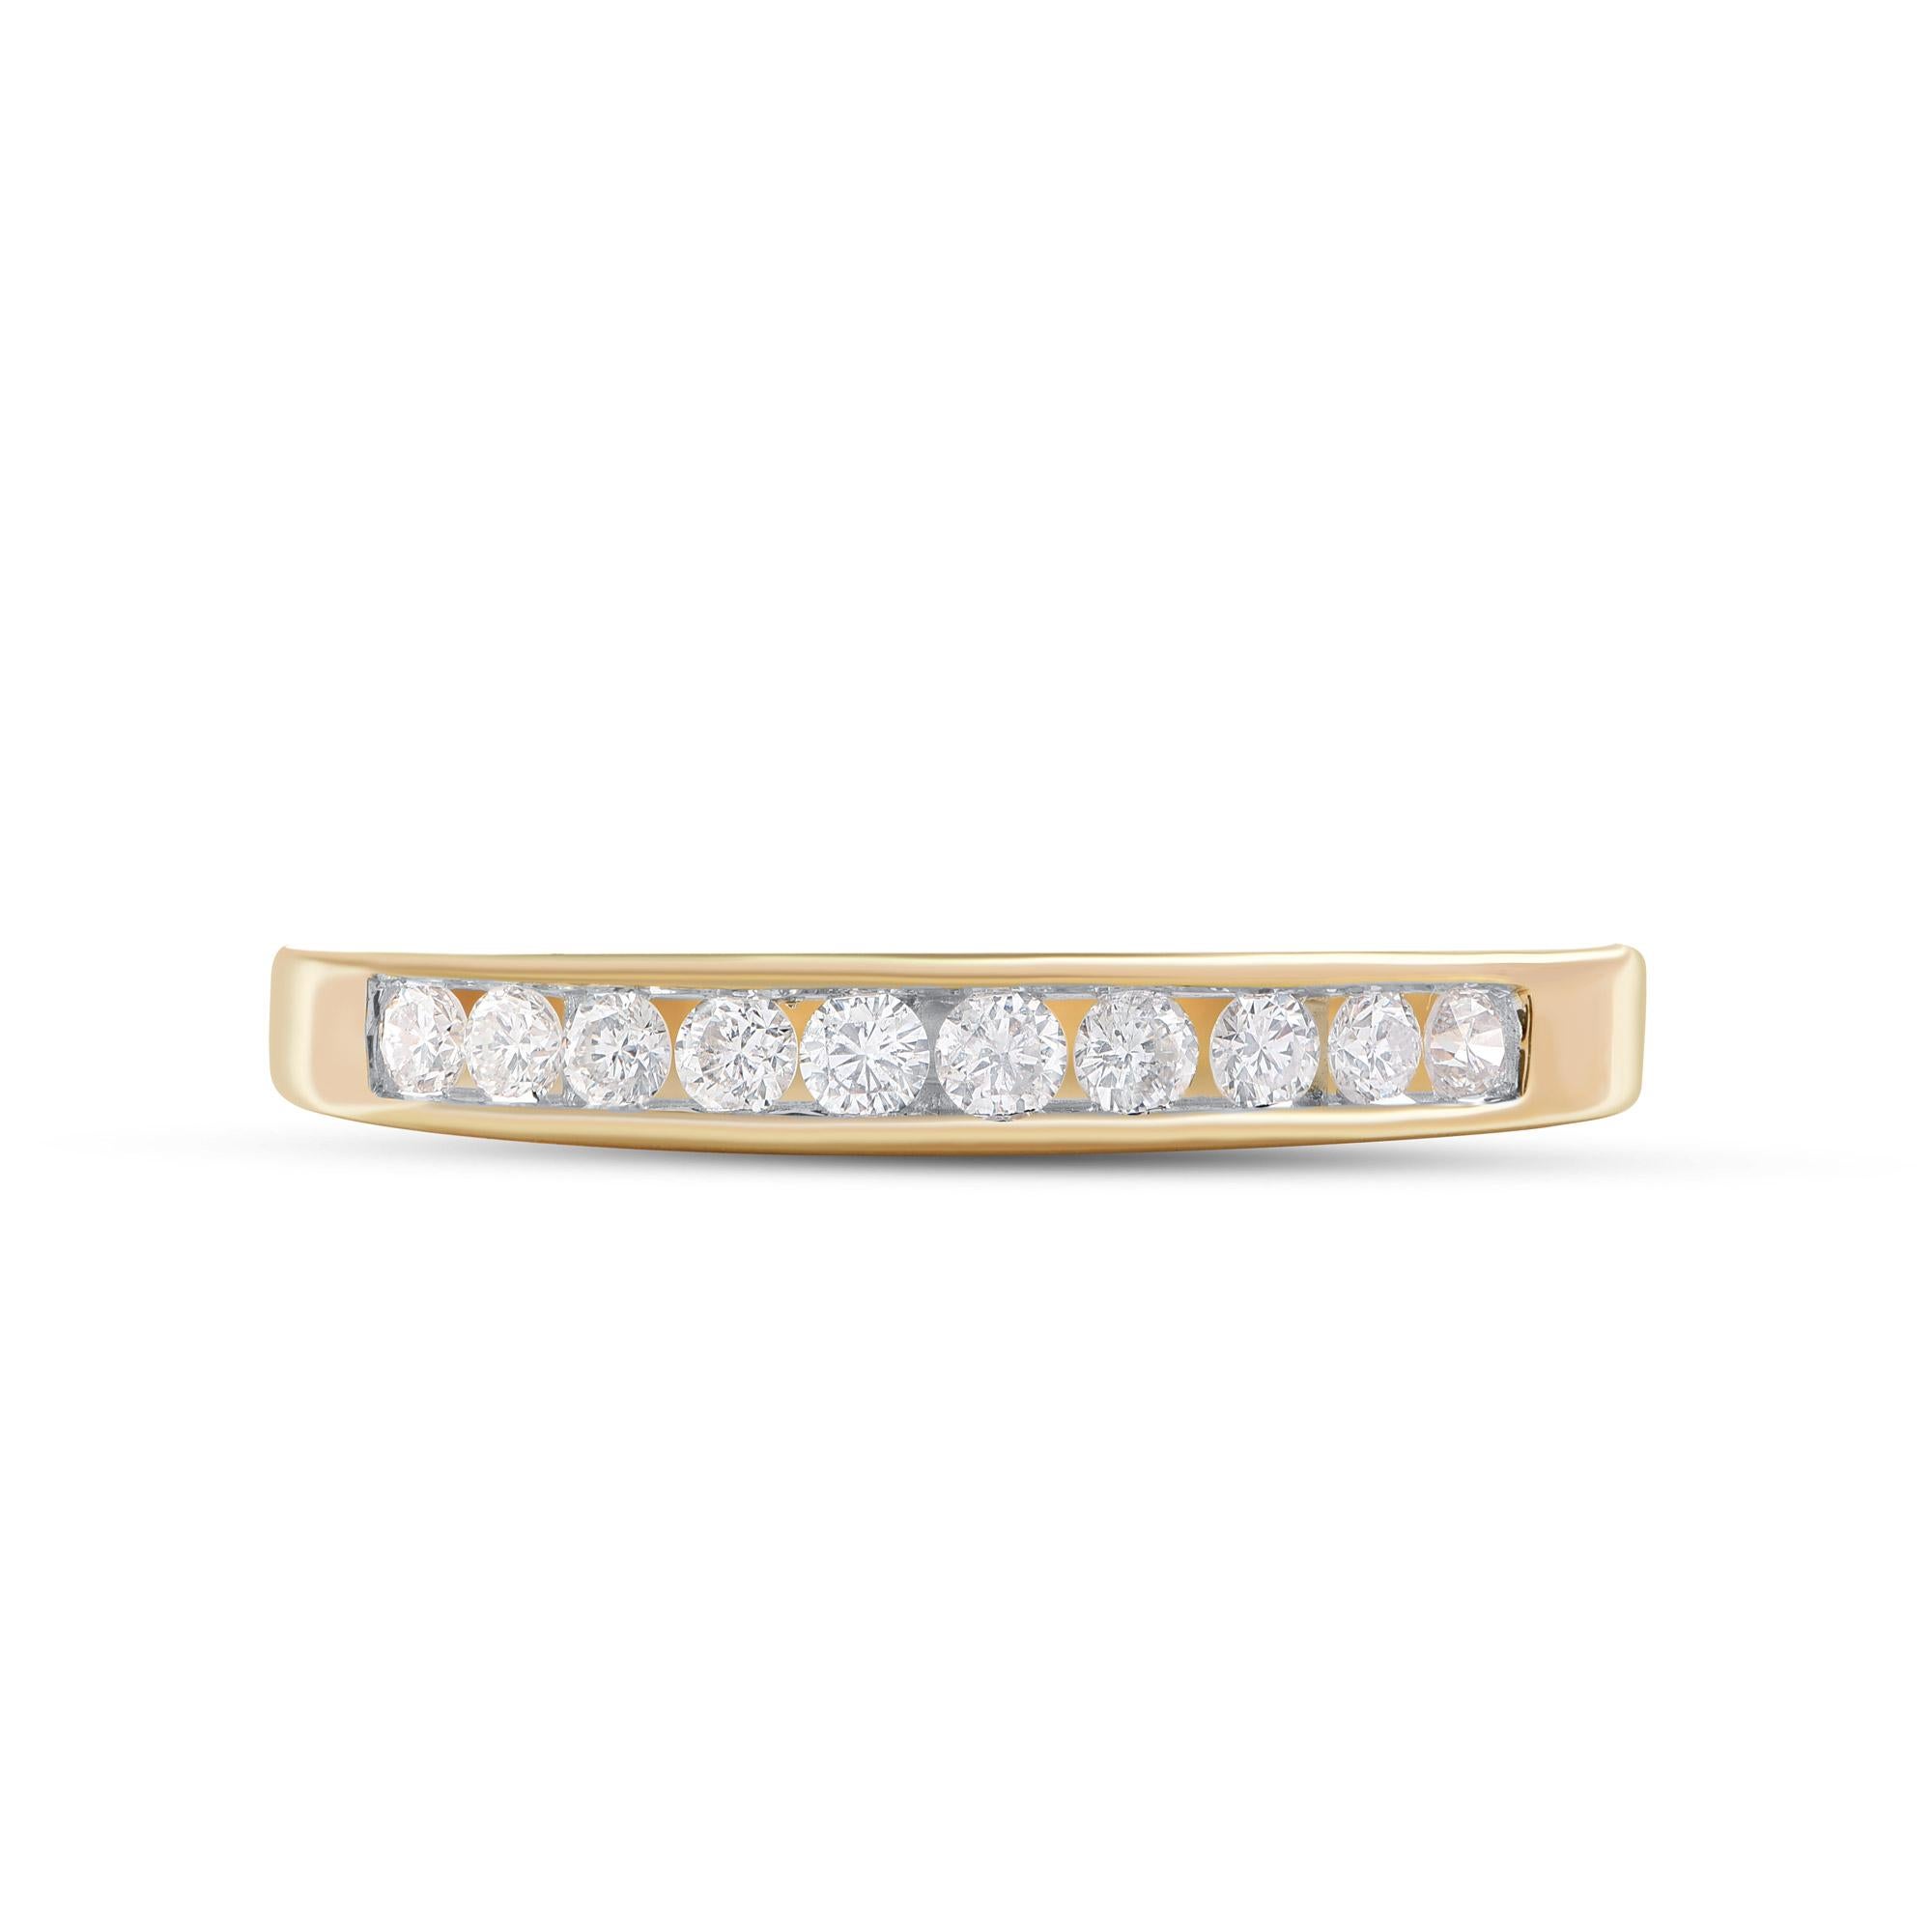 Bring charm to your look with this diamond wedding band Ring. This ring is beautifully crafted in 14 Karat yellow gold and embedded with 10 natural brilliant cut diamonds in channel setting. Total diamond weight is 0.25 carat. The diamonds are